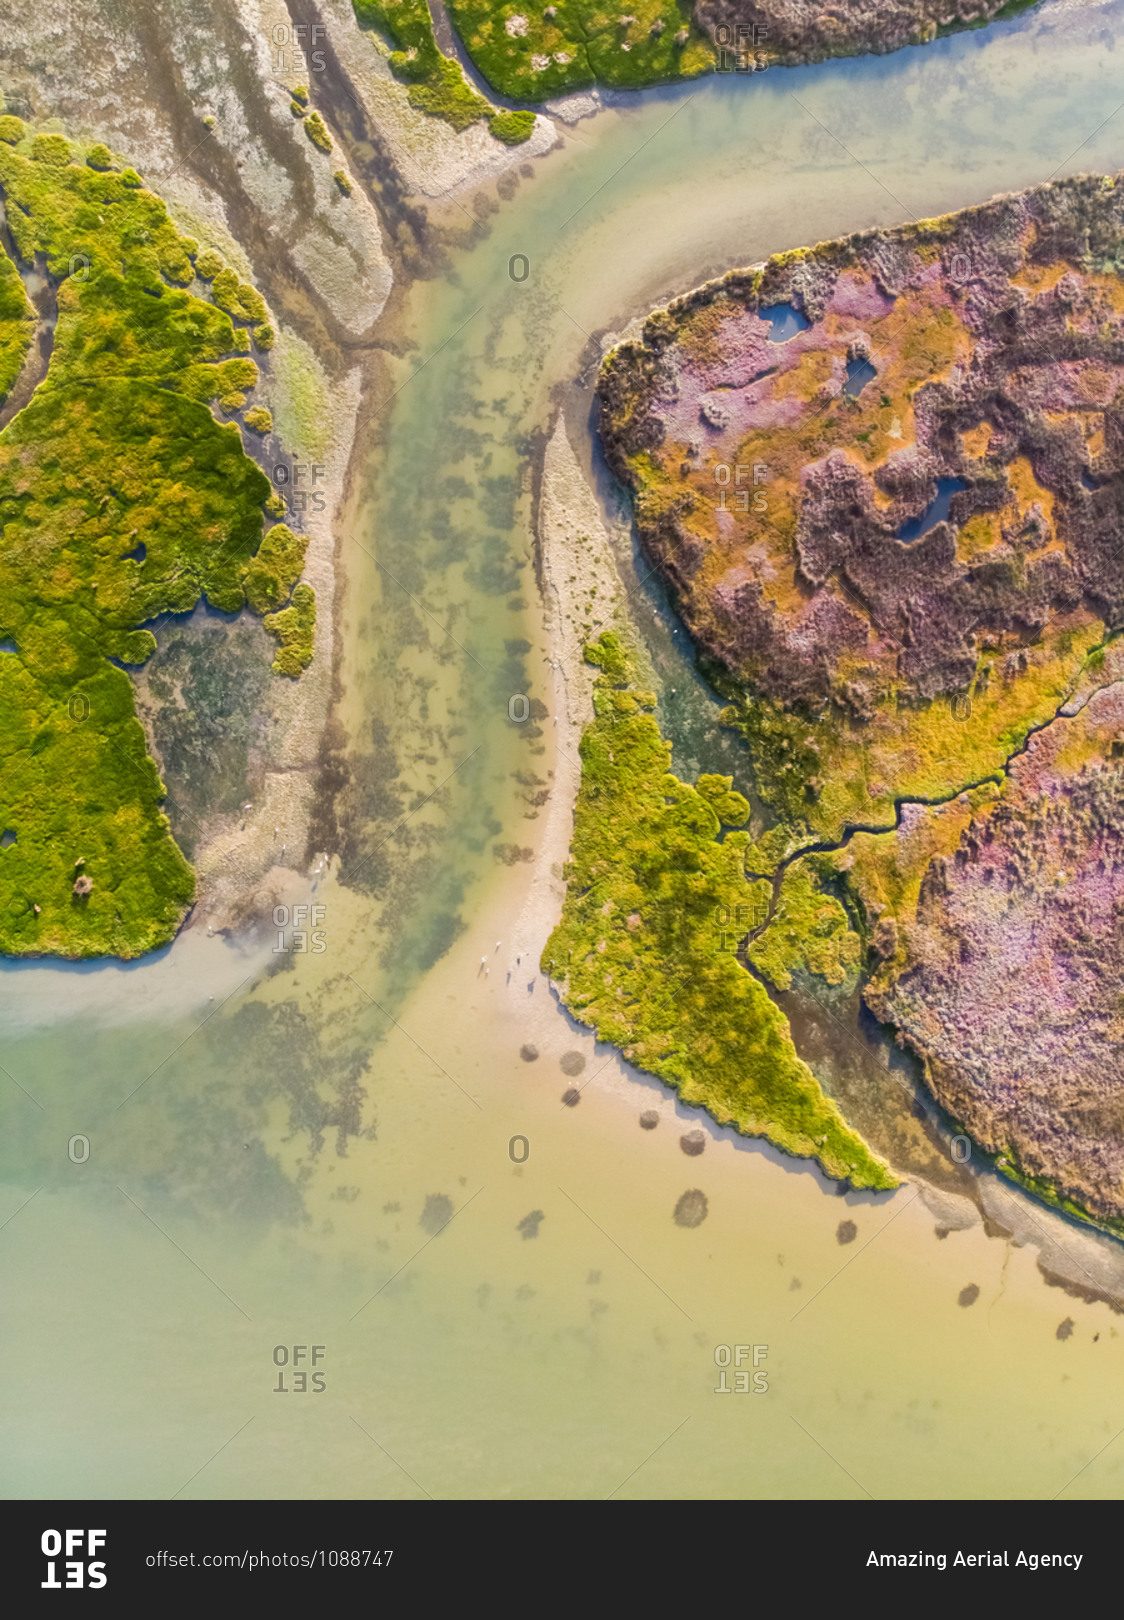 Aerial view of Velddrift wetland colorful abstract, Western Cape, South Africa